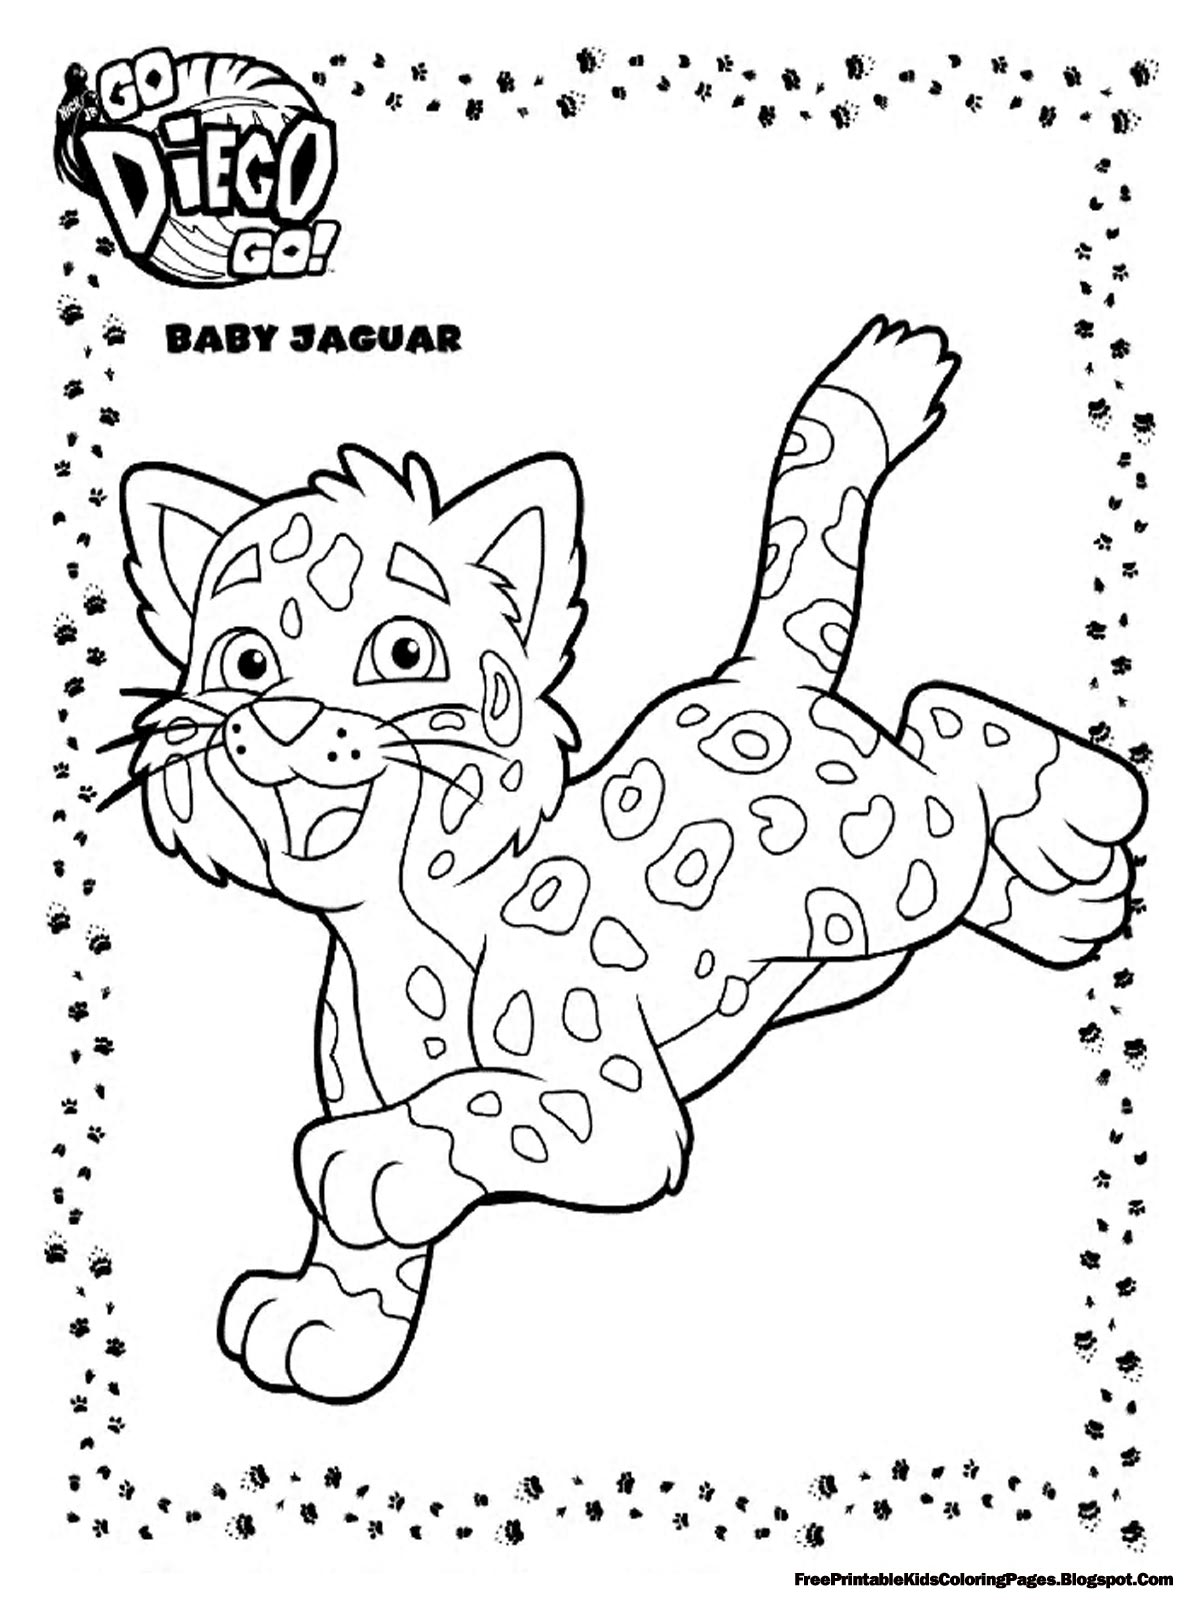 Coloring page: Go Diego! (Cartoons) #48513 - Free Printable Coloring Pages